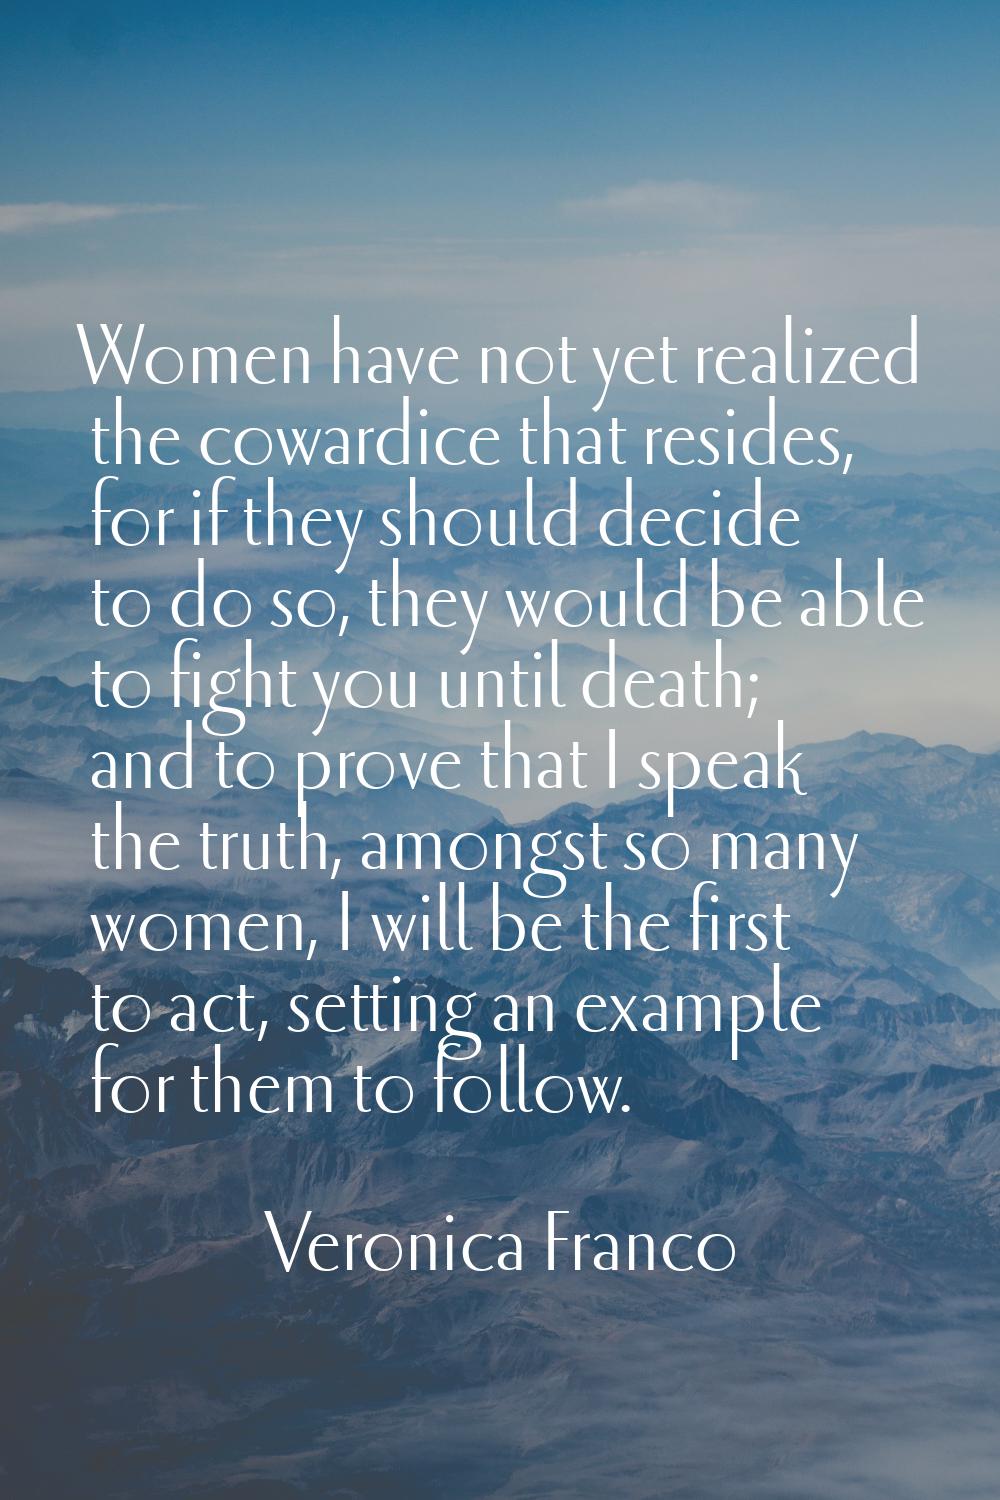 Women have not yet realized the cowardice that resides, for if they should decide to do so, they wo